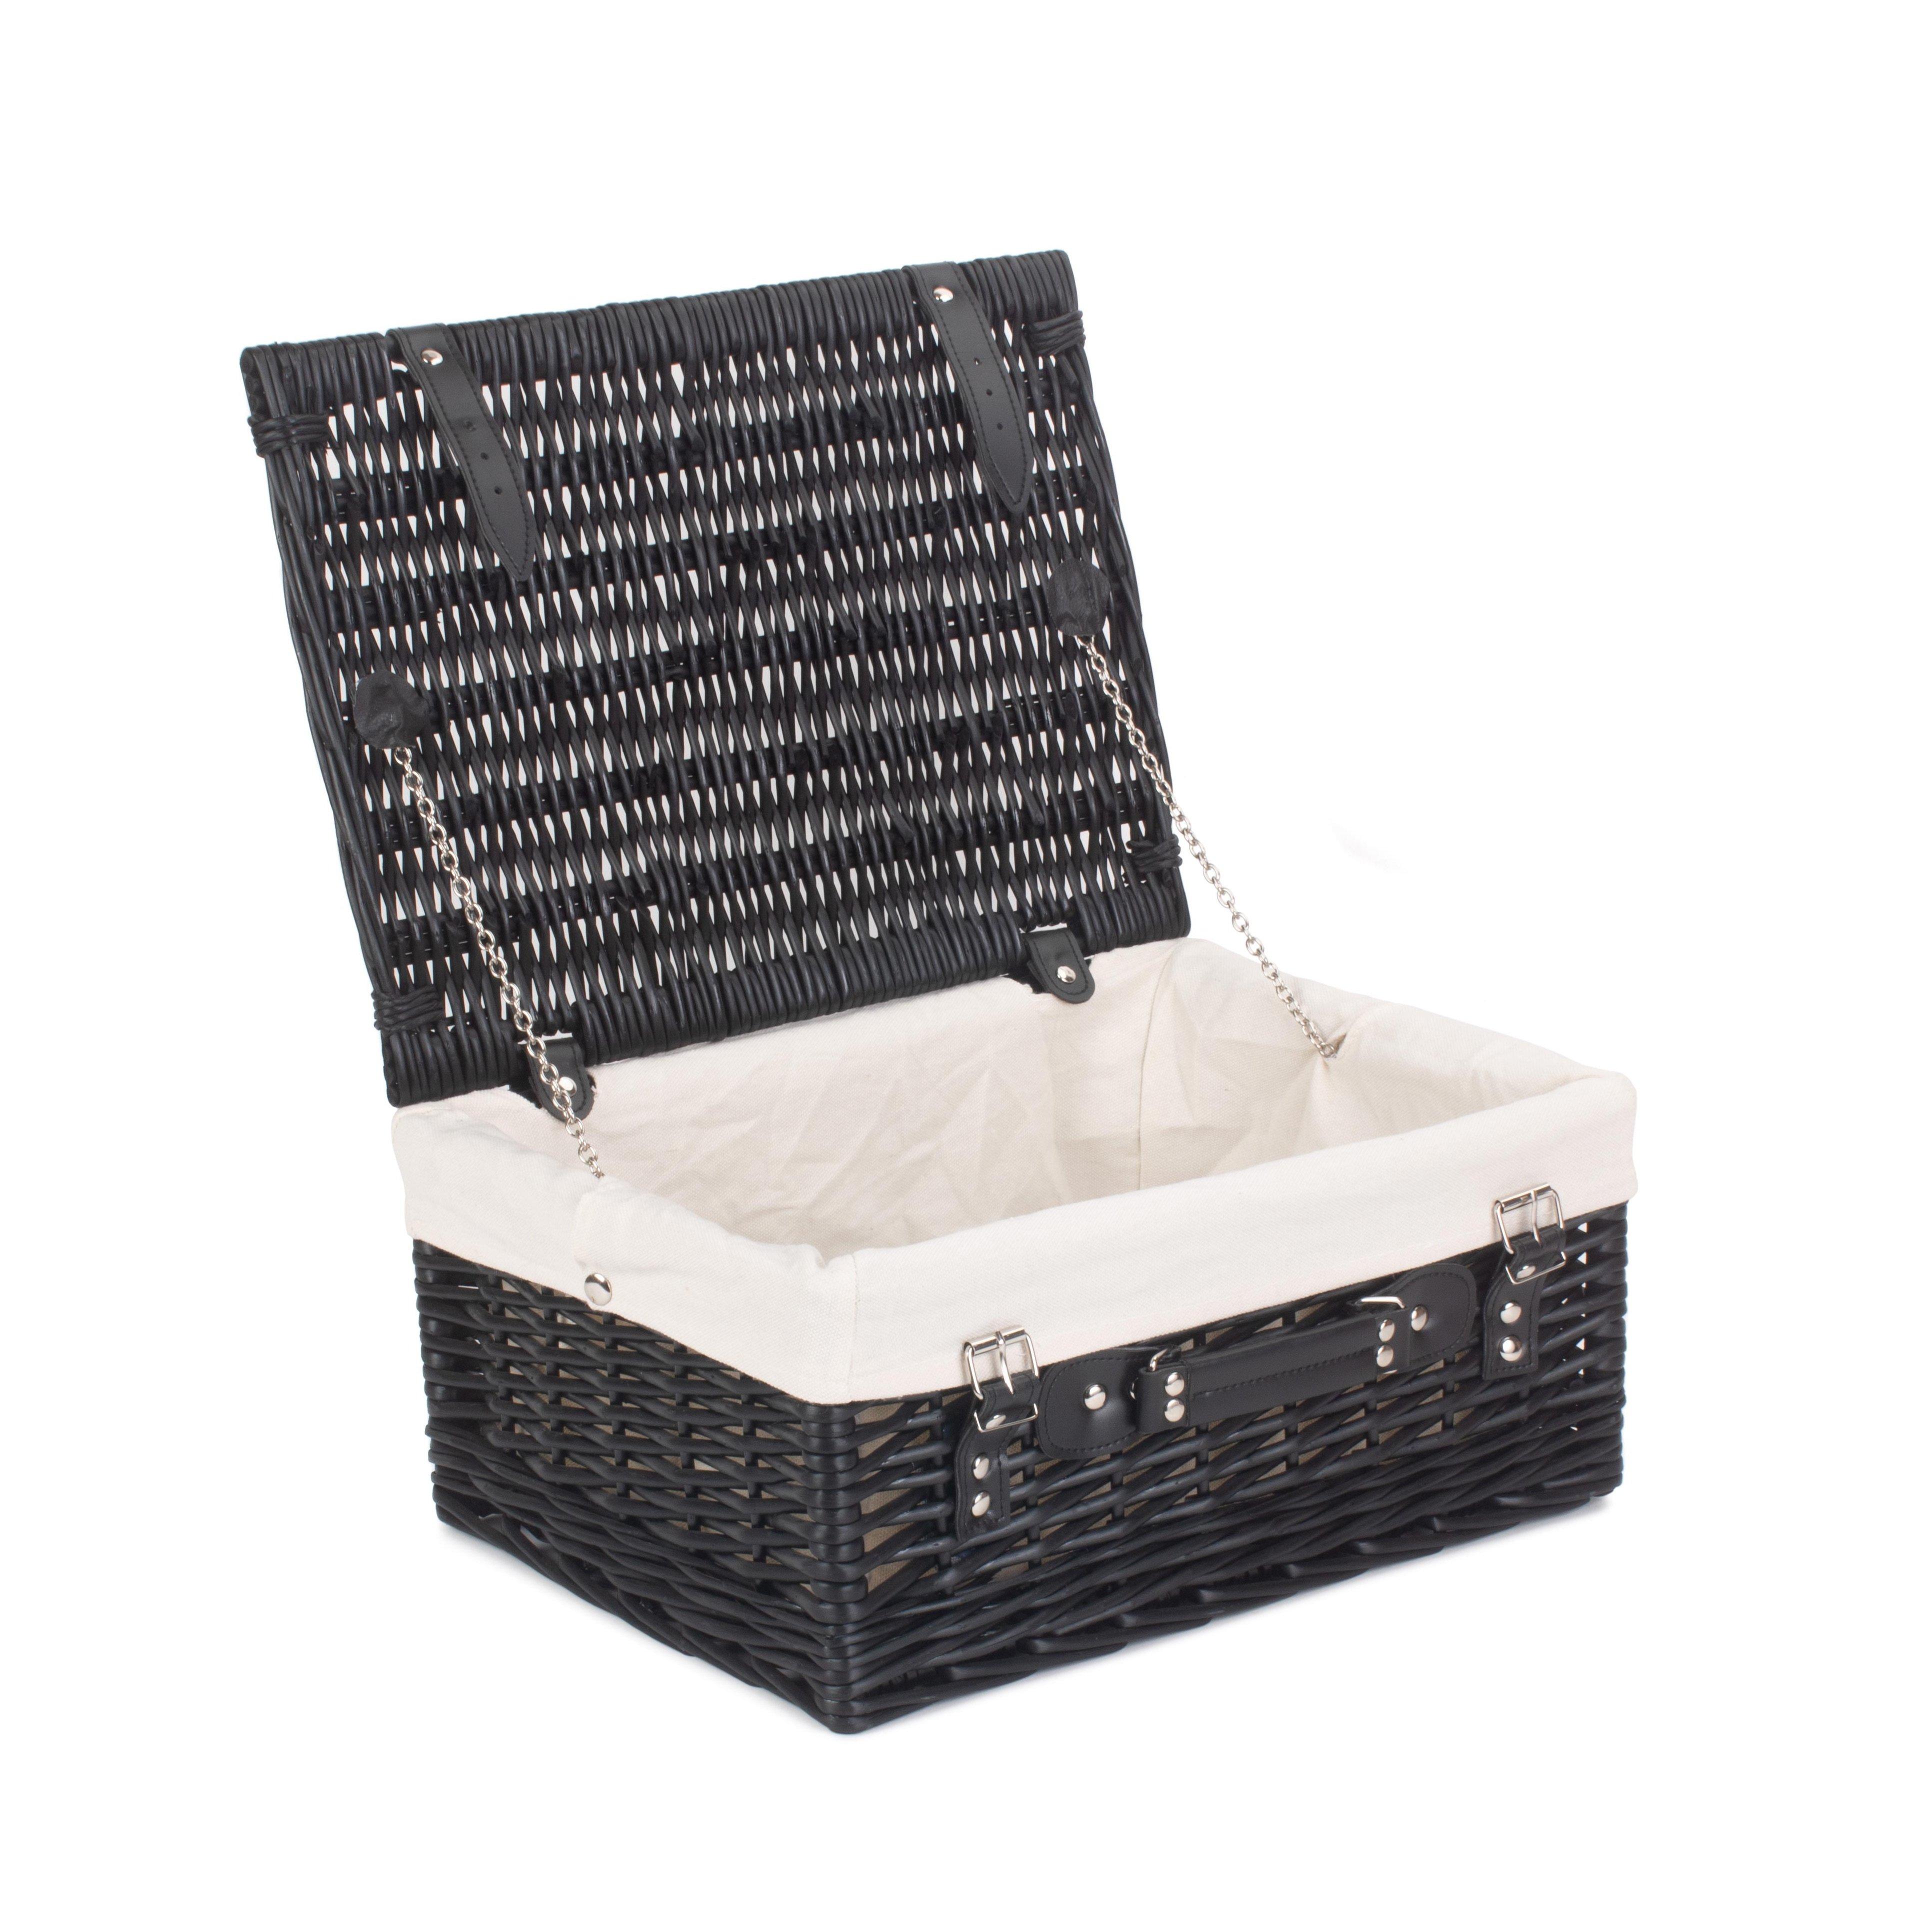 Wicker 40cm Empty Black Willow Picnic Basket with Cotton Lining